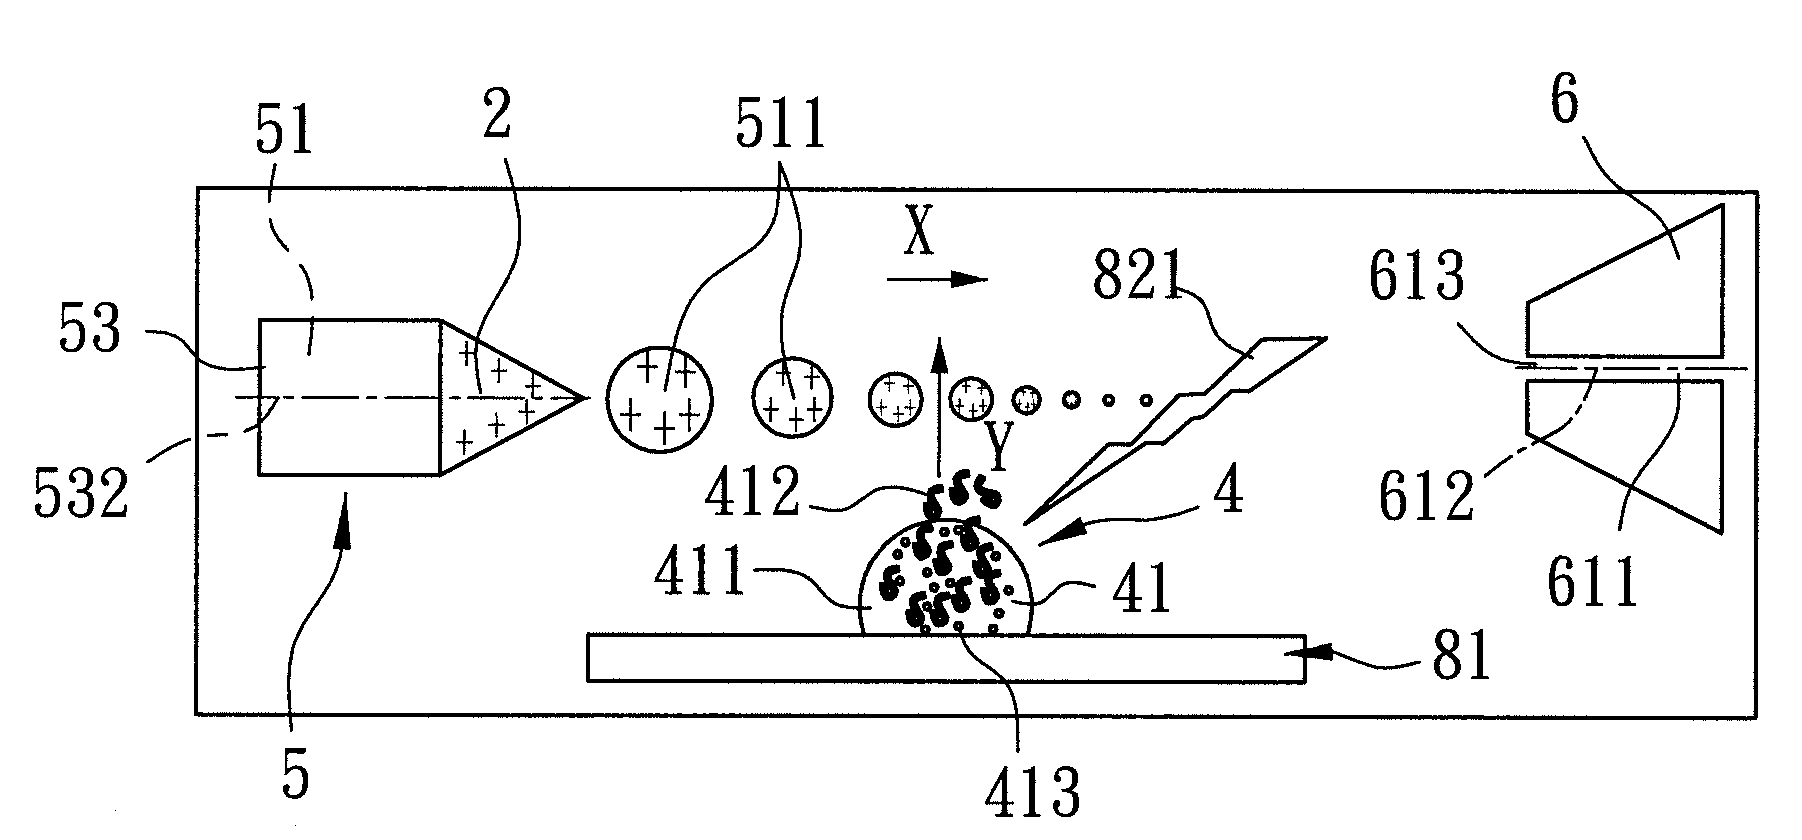 Laser desorption device, mass spectrometer assembly, and method for ambient liquid mass spectrometry